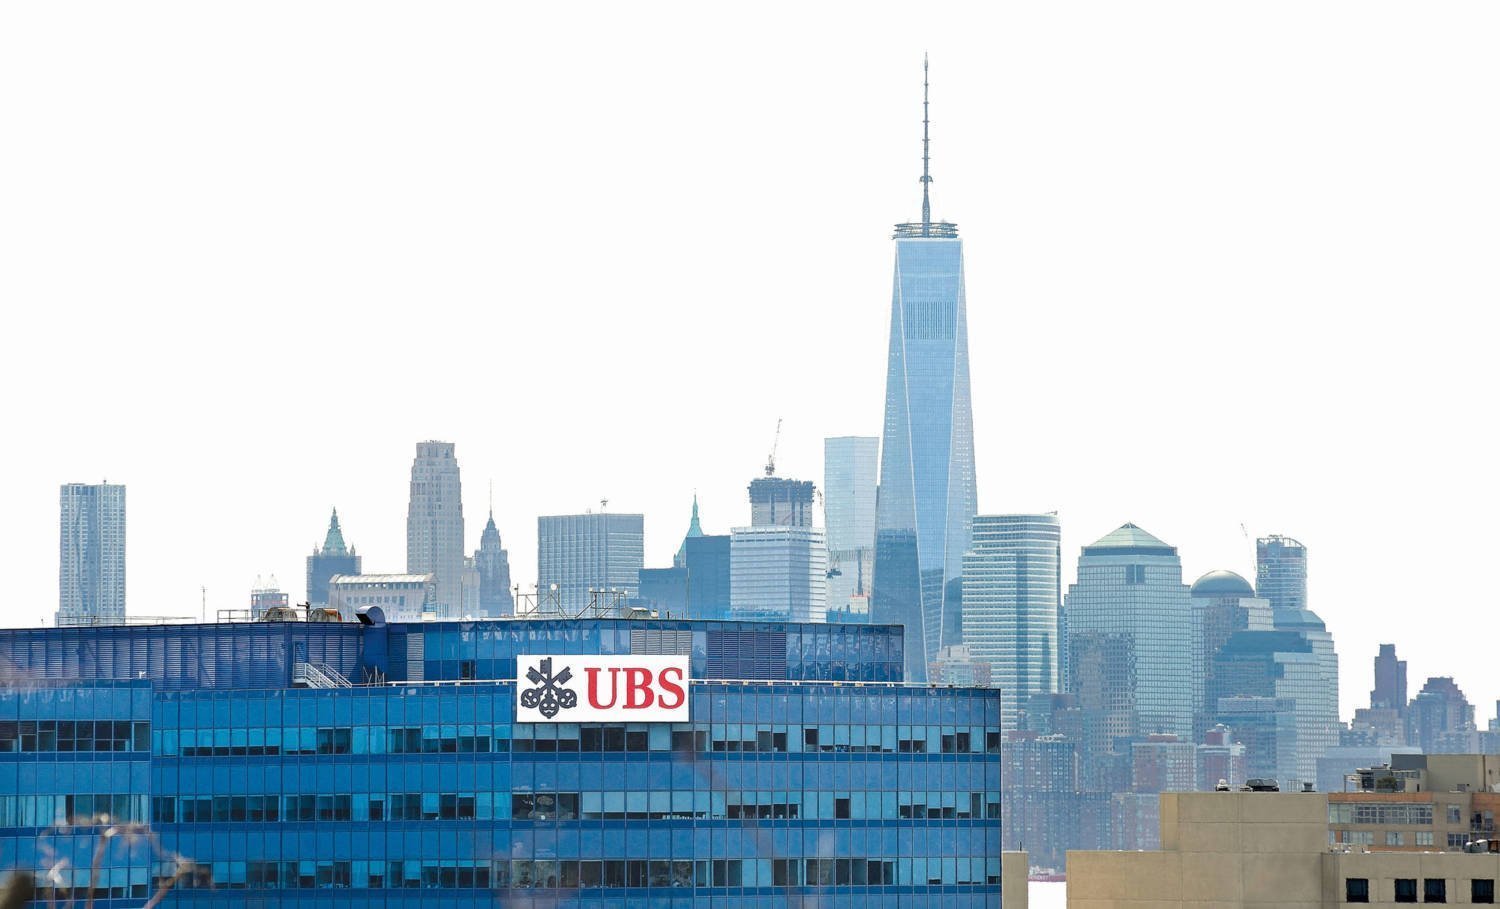 Ubs Building In Weehawken, Usa. Exterior With Ubs Key Symbol And Logo.